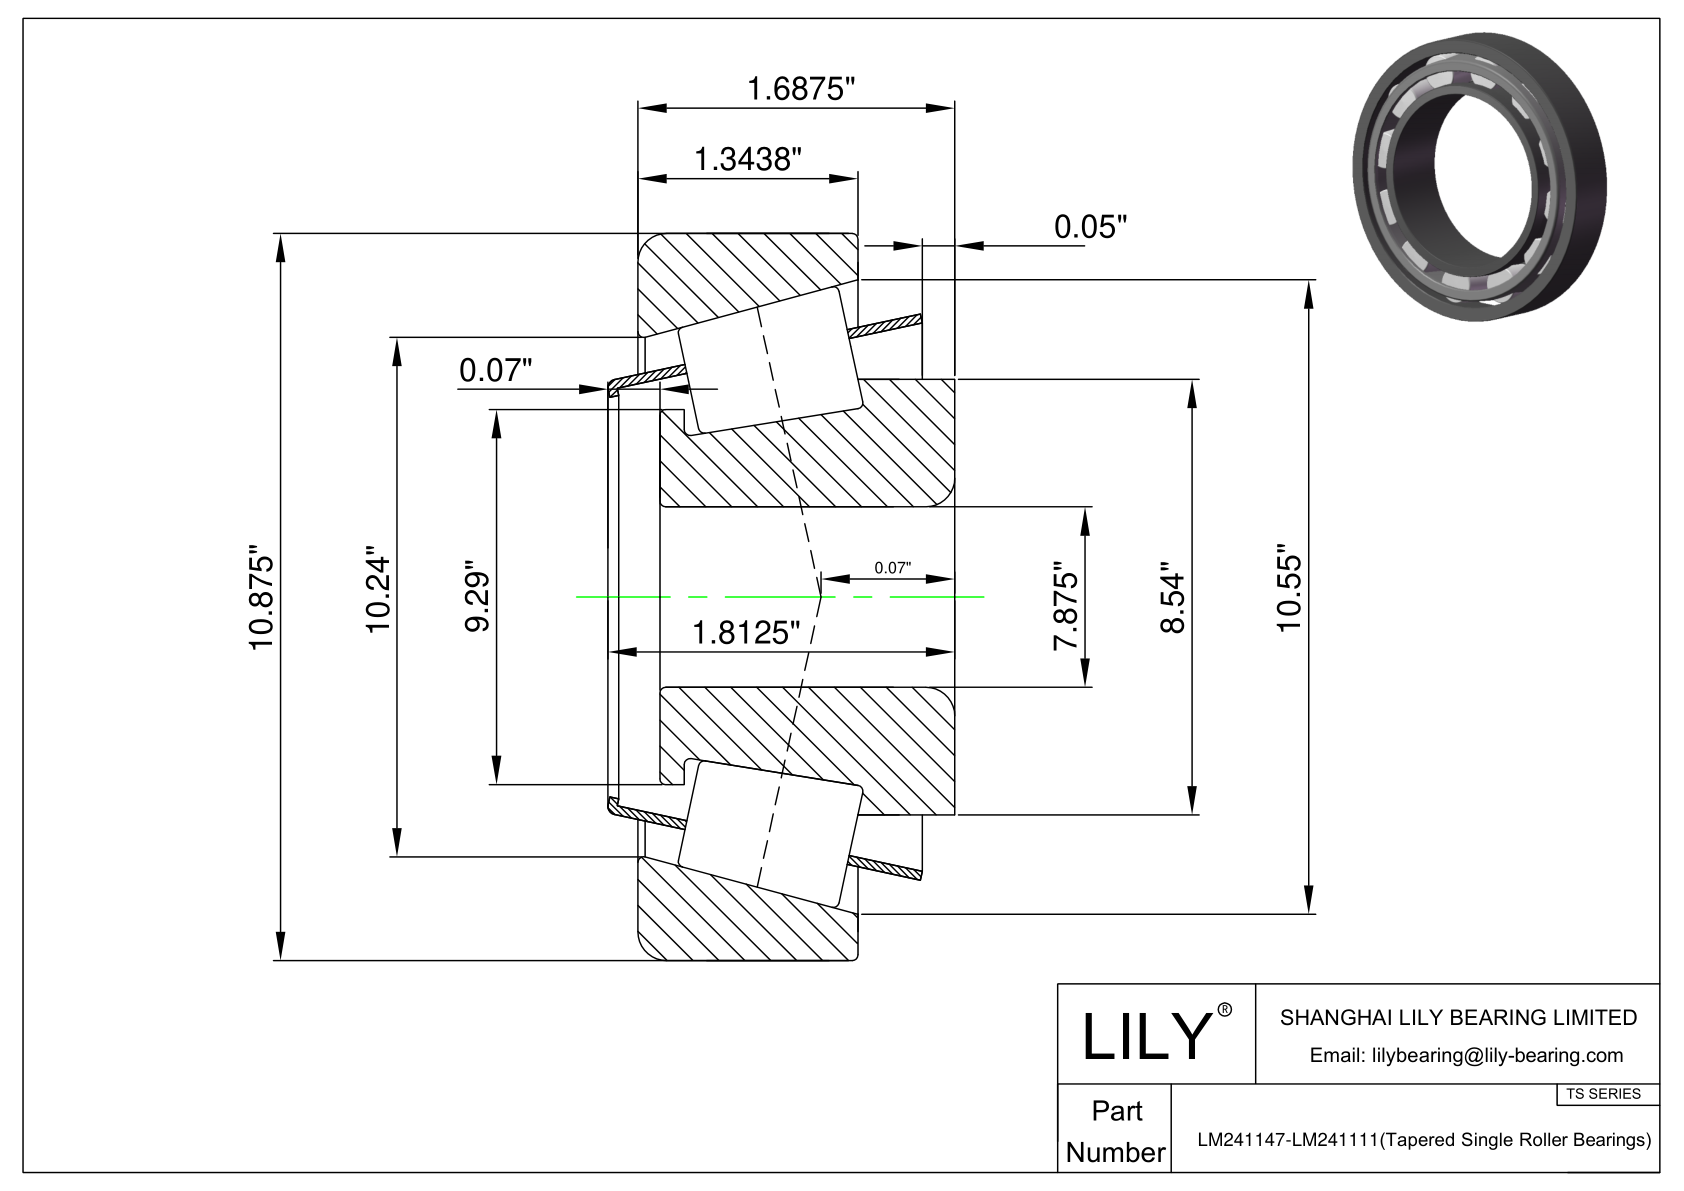 LM241147-LM241111 TS (Tapered Single Roller Bearings) (Imperial) cad drawing